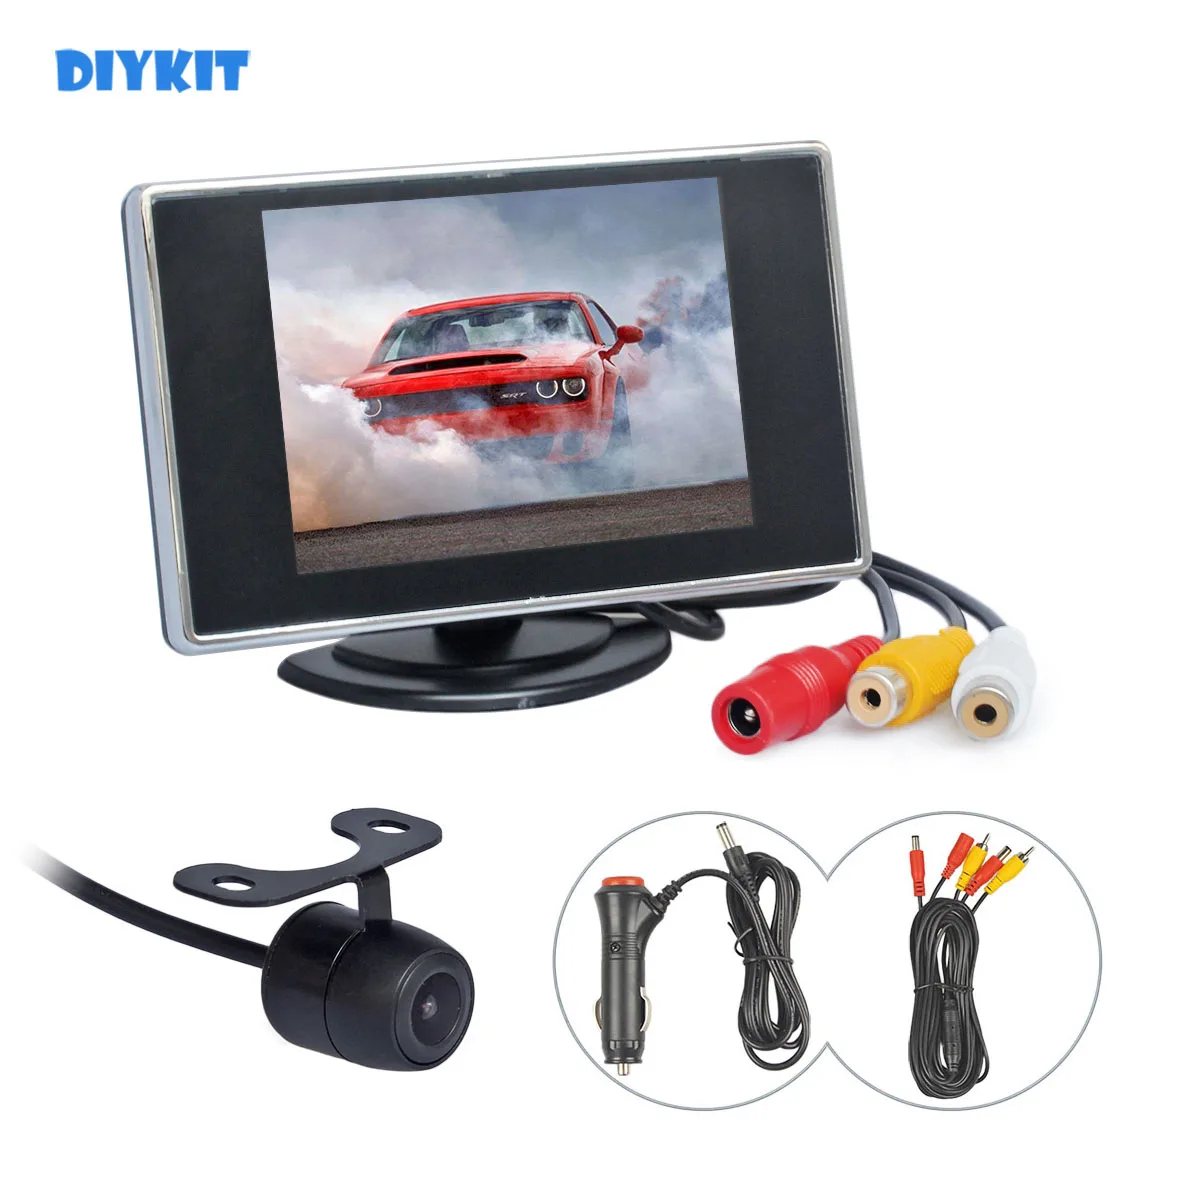 

DIYKIT Wired 3.5inch TFT LCD Car Monitor Backup Rear View Car Camera Kit Reversing Camera Parking Assistance System Easy Connect